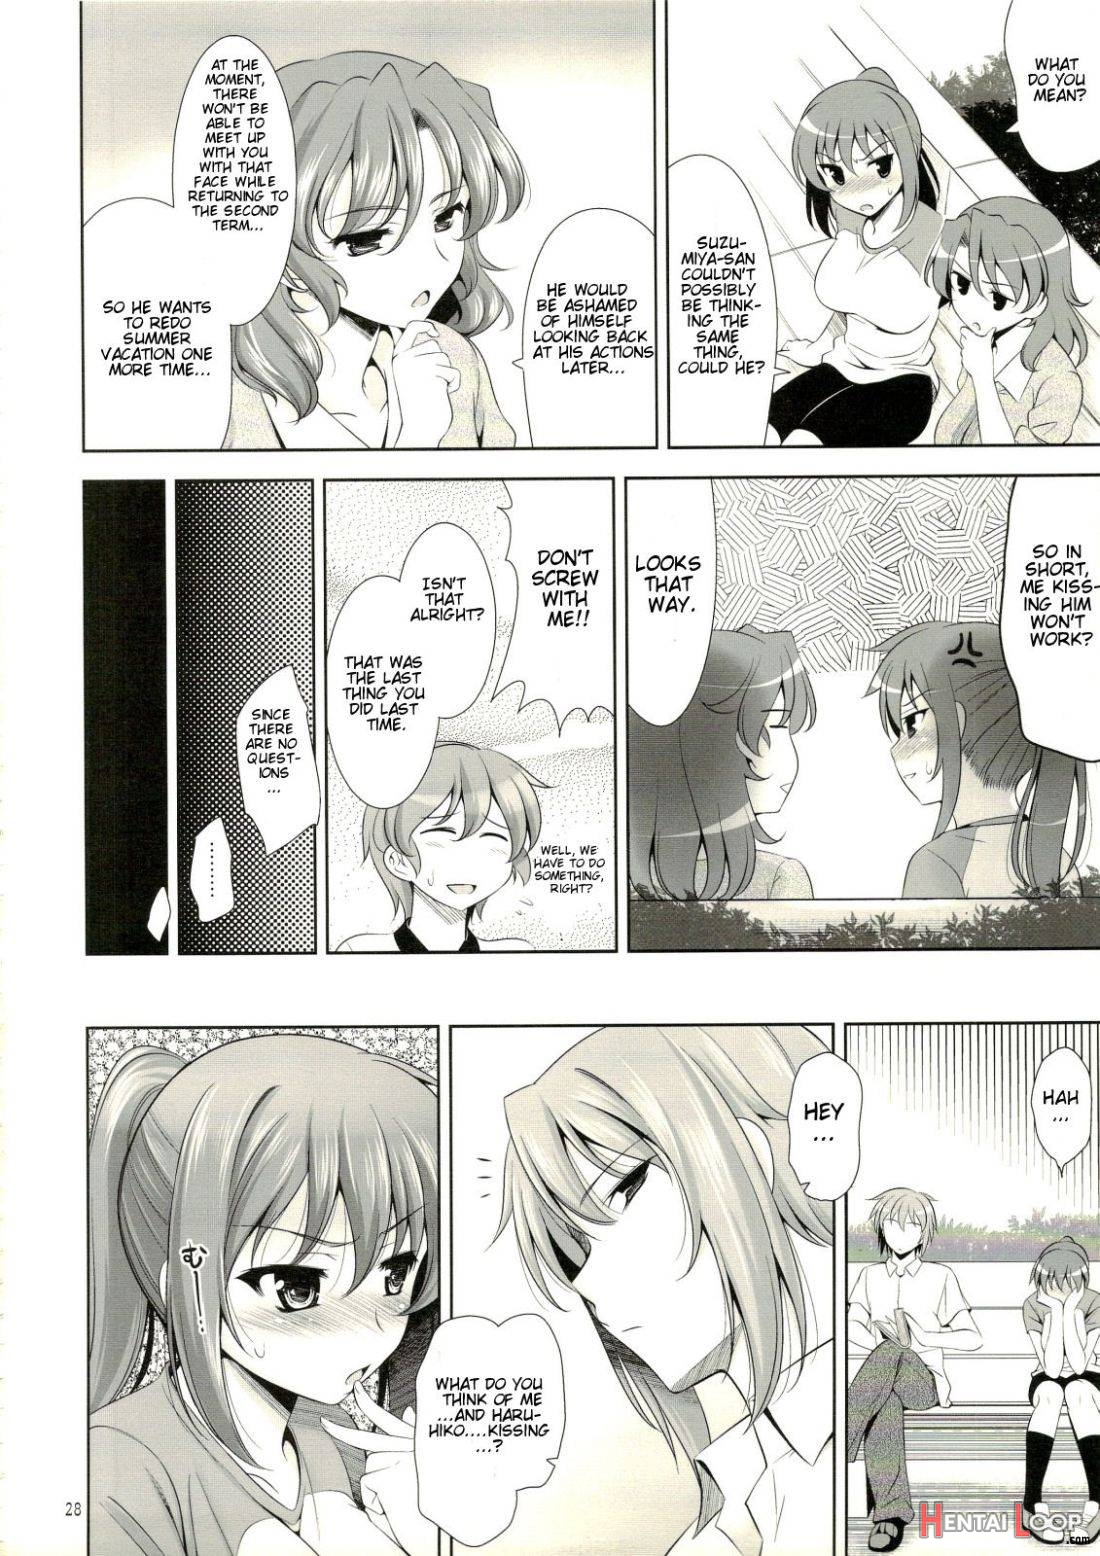 Manatsu no Yo no Yume no Mata Yume no Mata Yume page 25